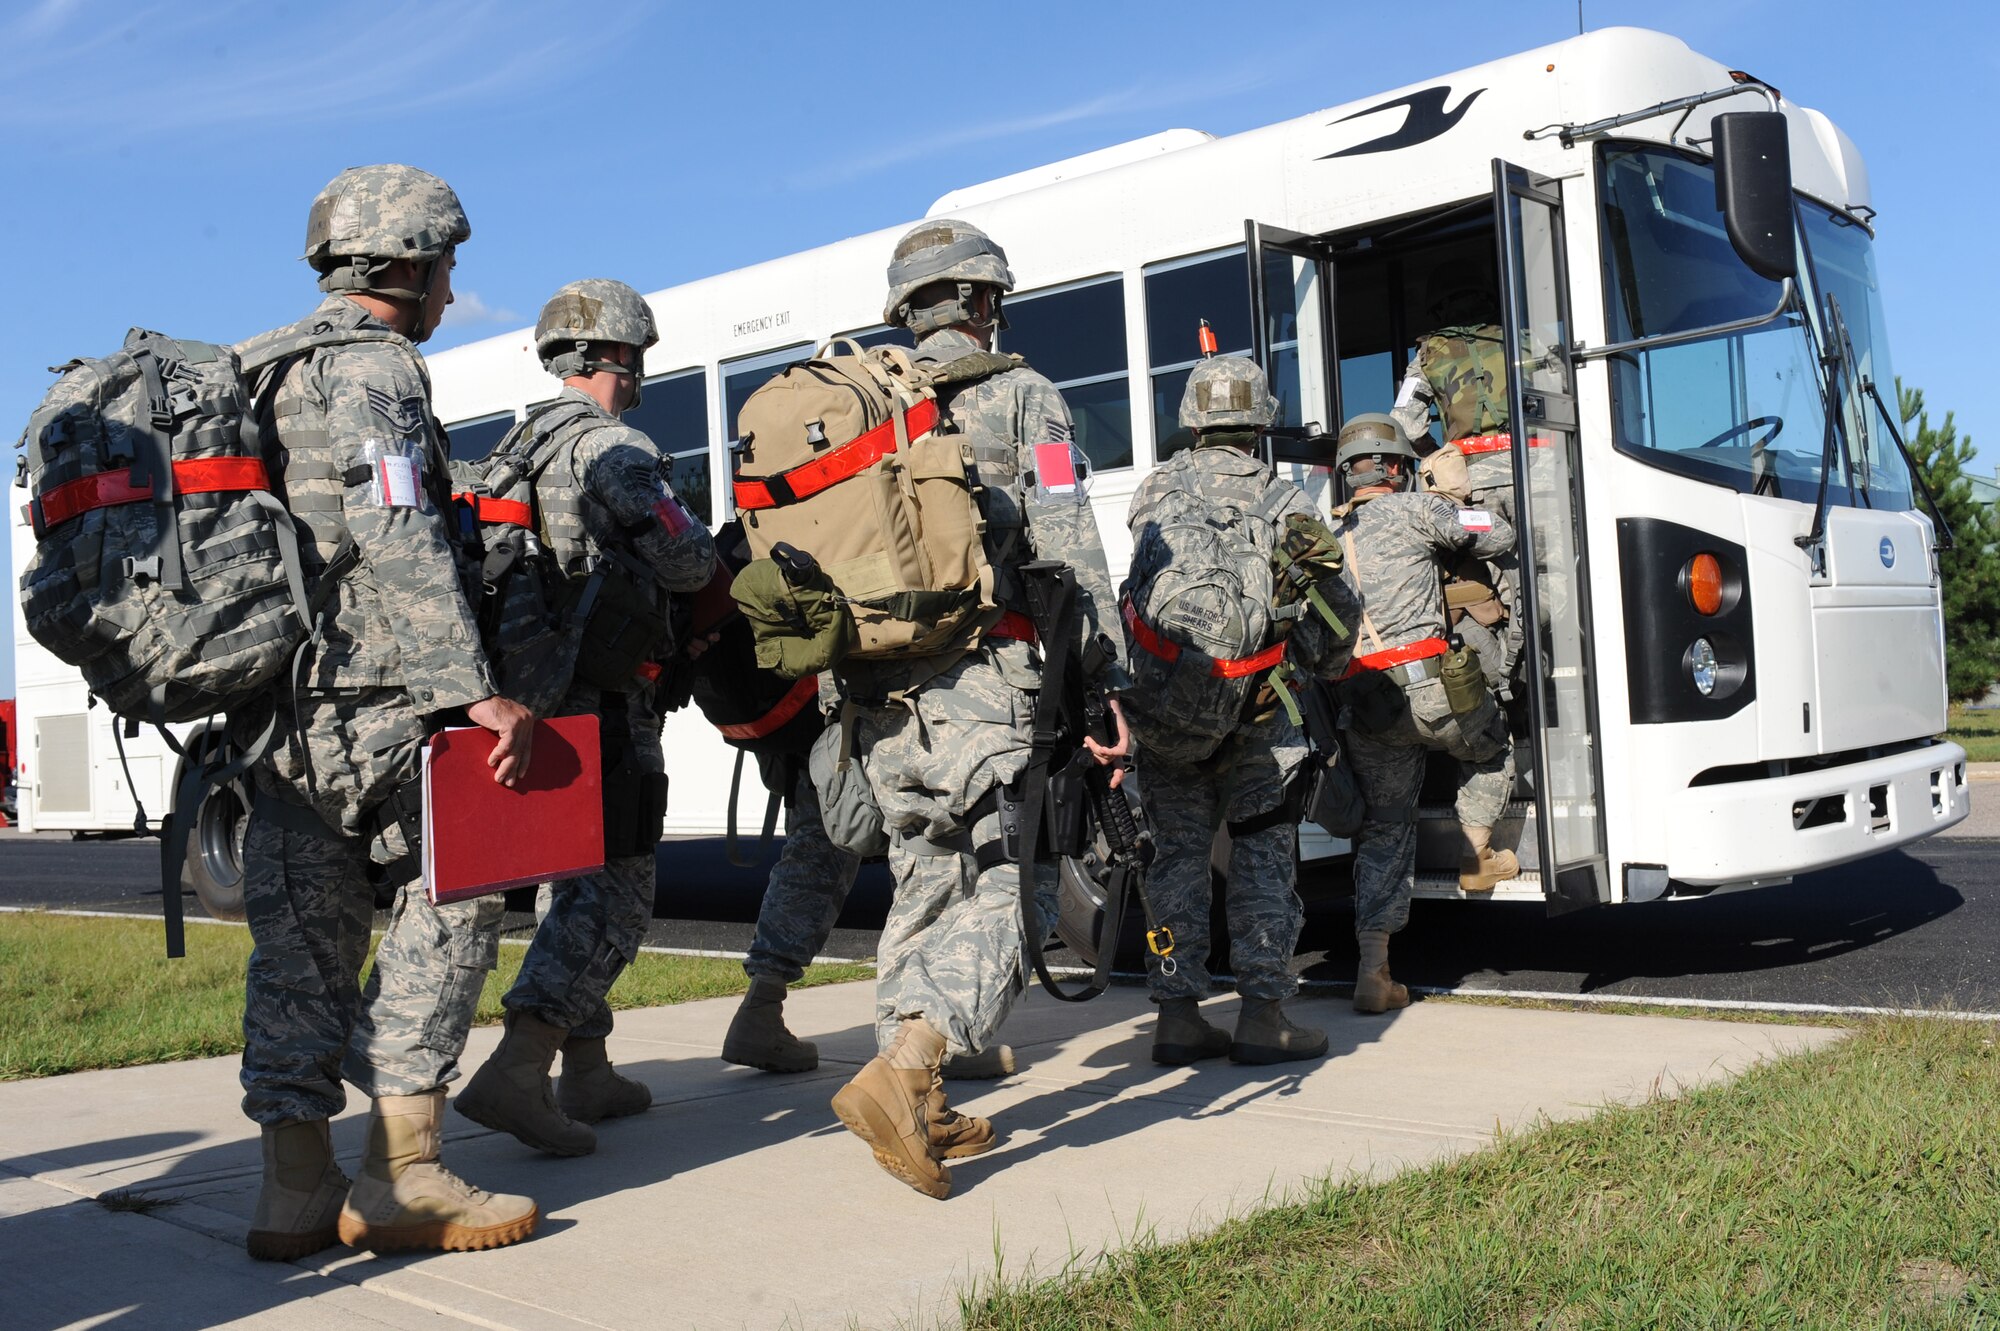 Airmen from Little Rock Air Force Base, Ark., board a bus following a right-start briefing at Volk Field, Wis., Sept. 10, 2011. The briefing started the operational readiness exercise, which is meant to guage the wing's contingency preparedness. 